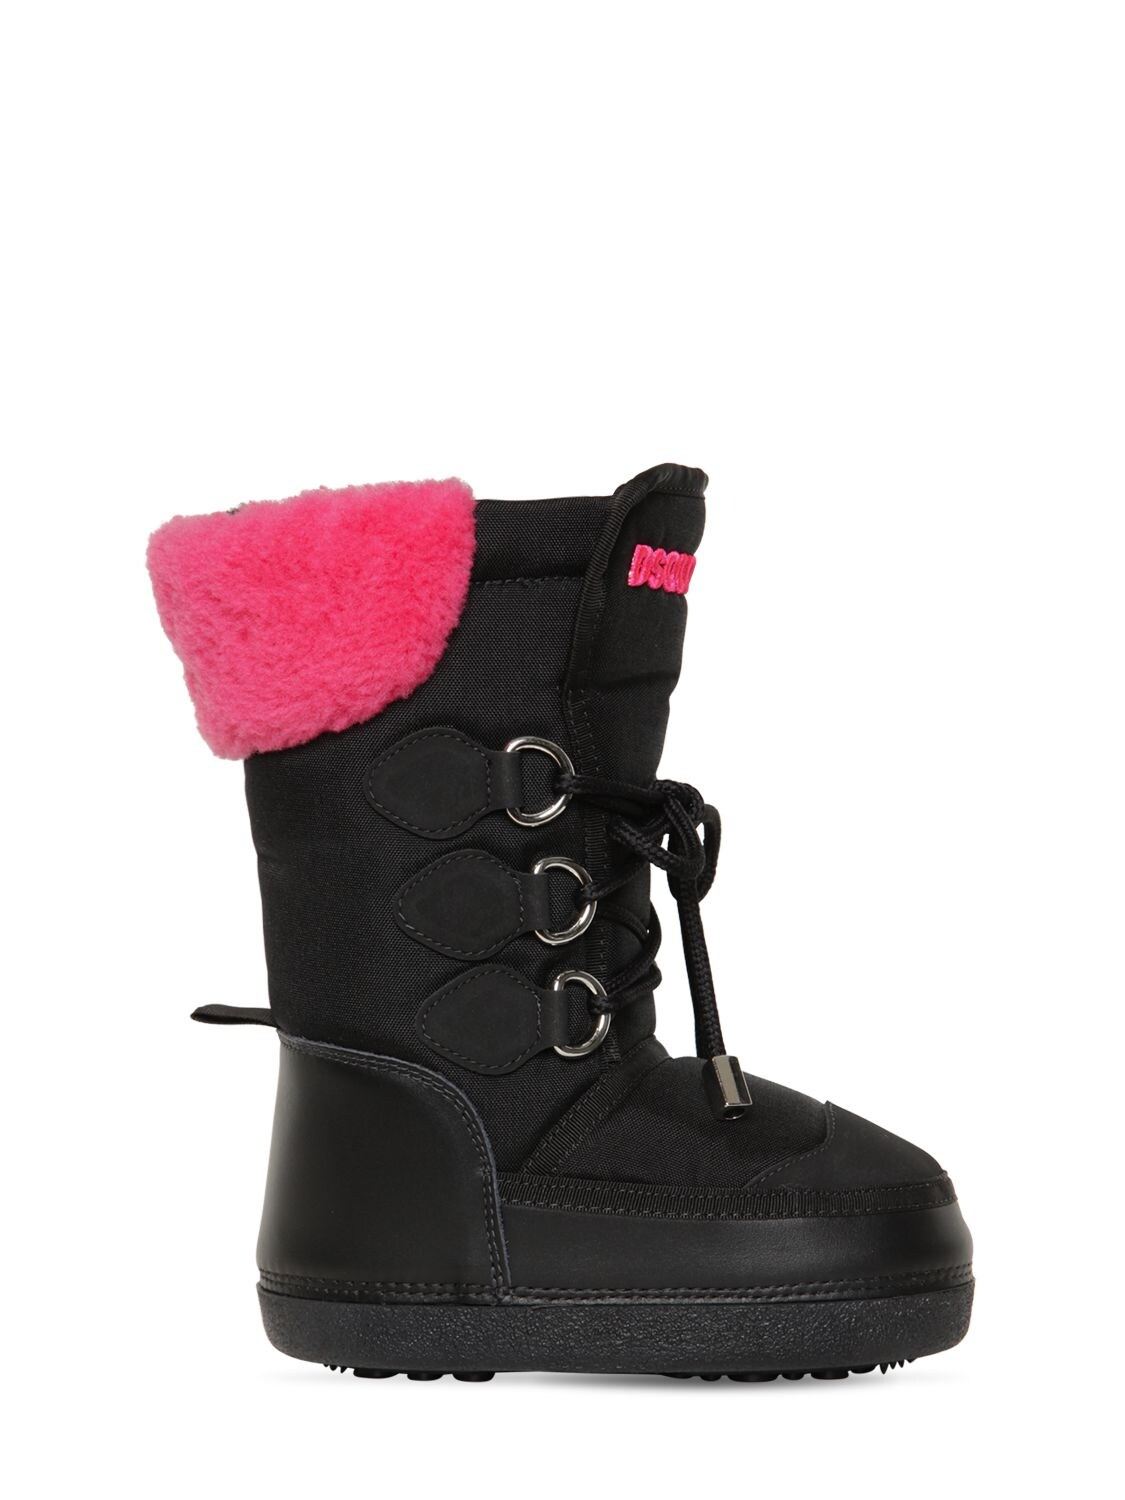 Dsquared2 Kids' Nylon & Leather Snow Boots In Black,pink